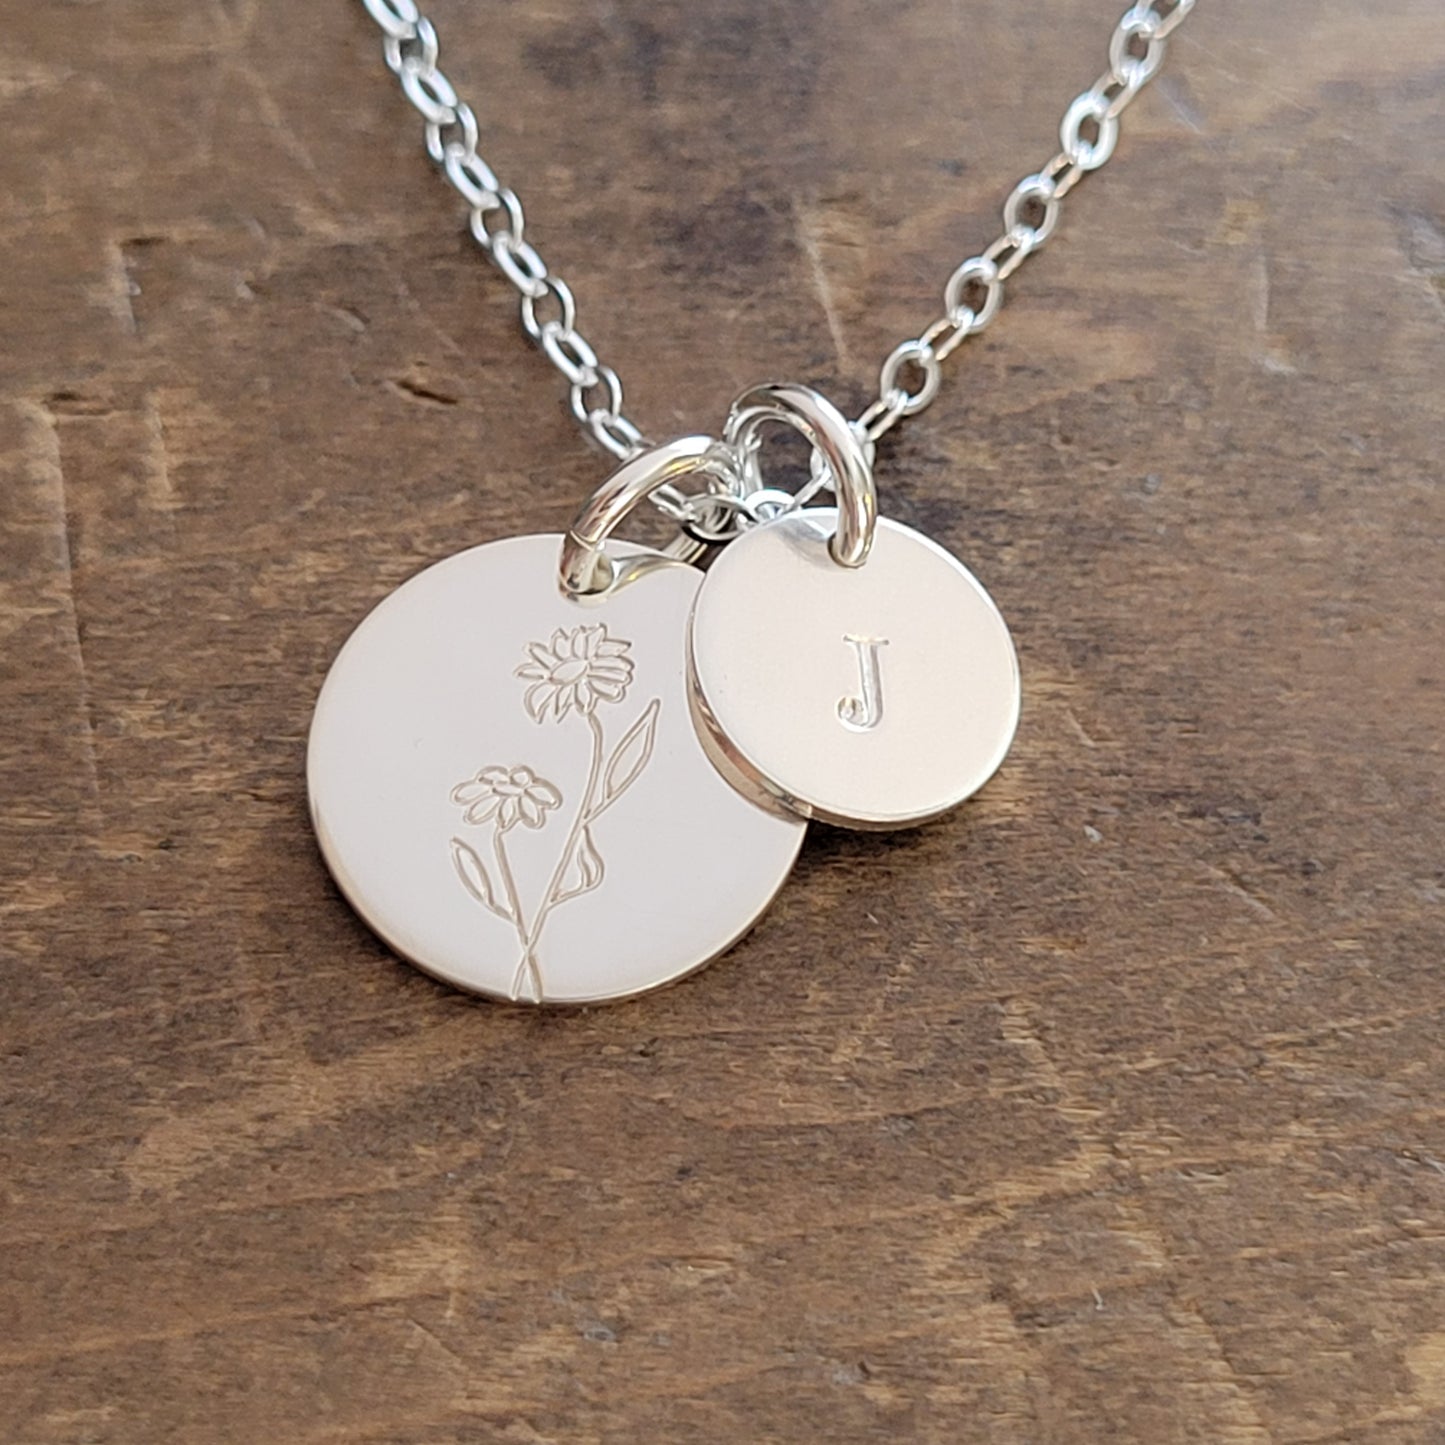 Birth Flower + Initial Necklace . STERLING SILVER Floral Disc Necklace